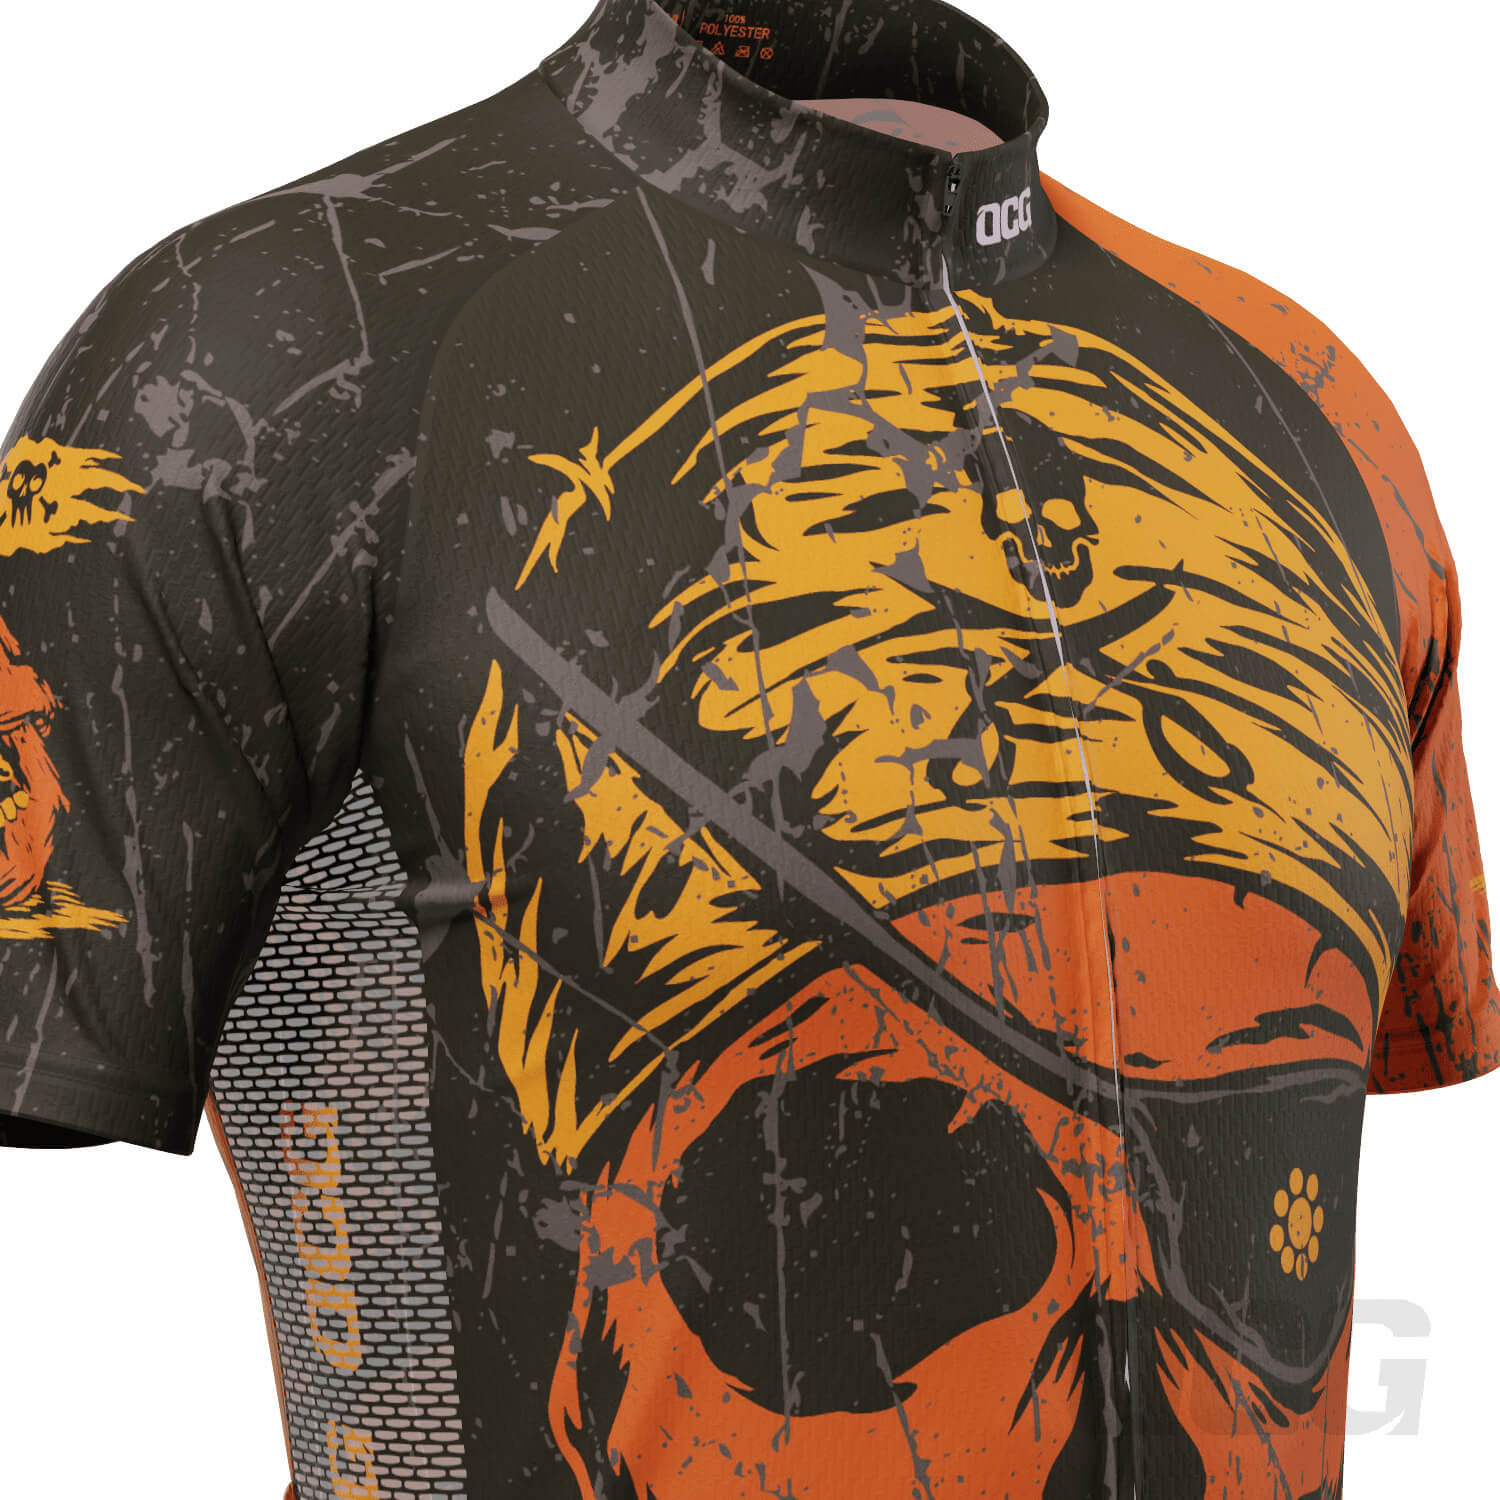 Men's One Eyed Willy Pirate Short Sleeve Cycling Jersey